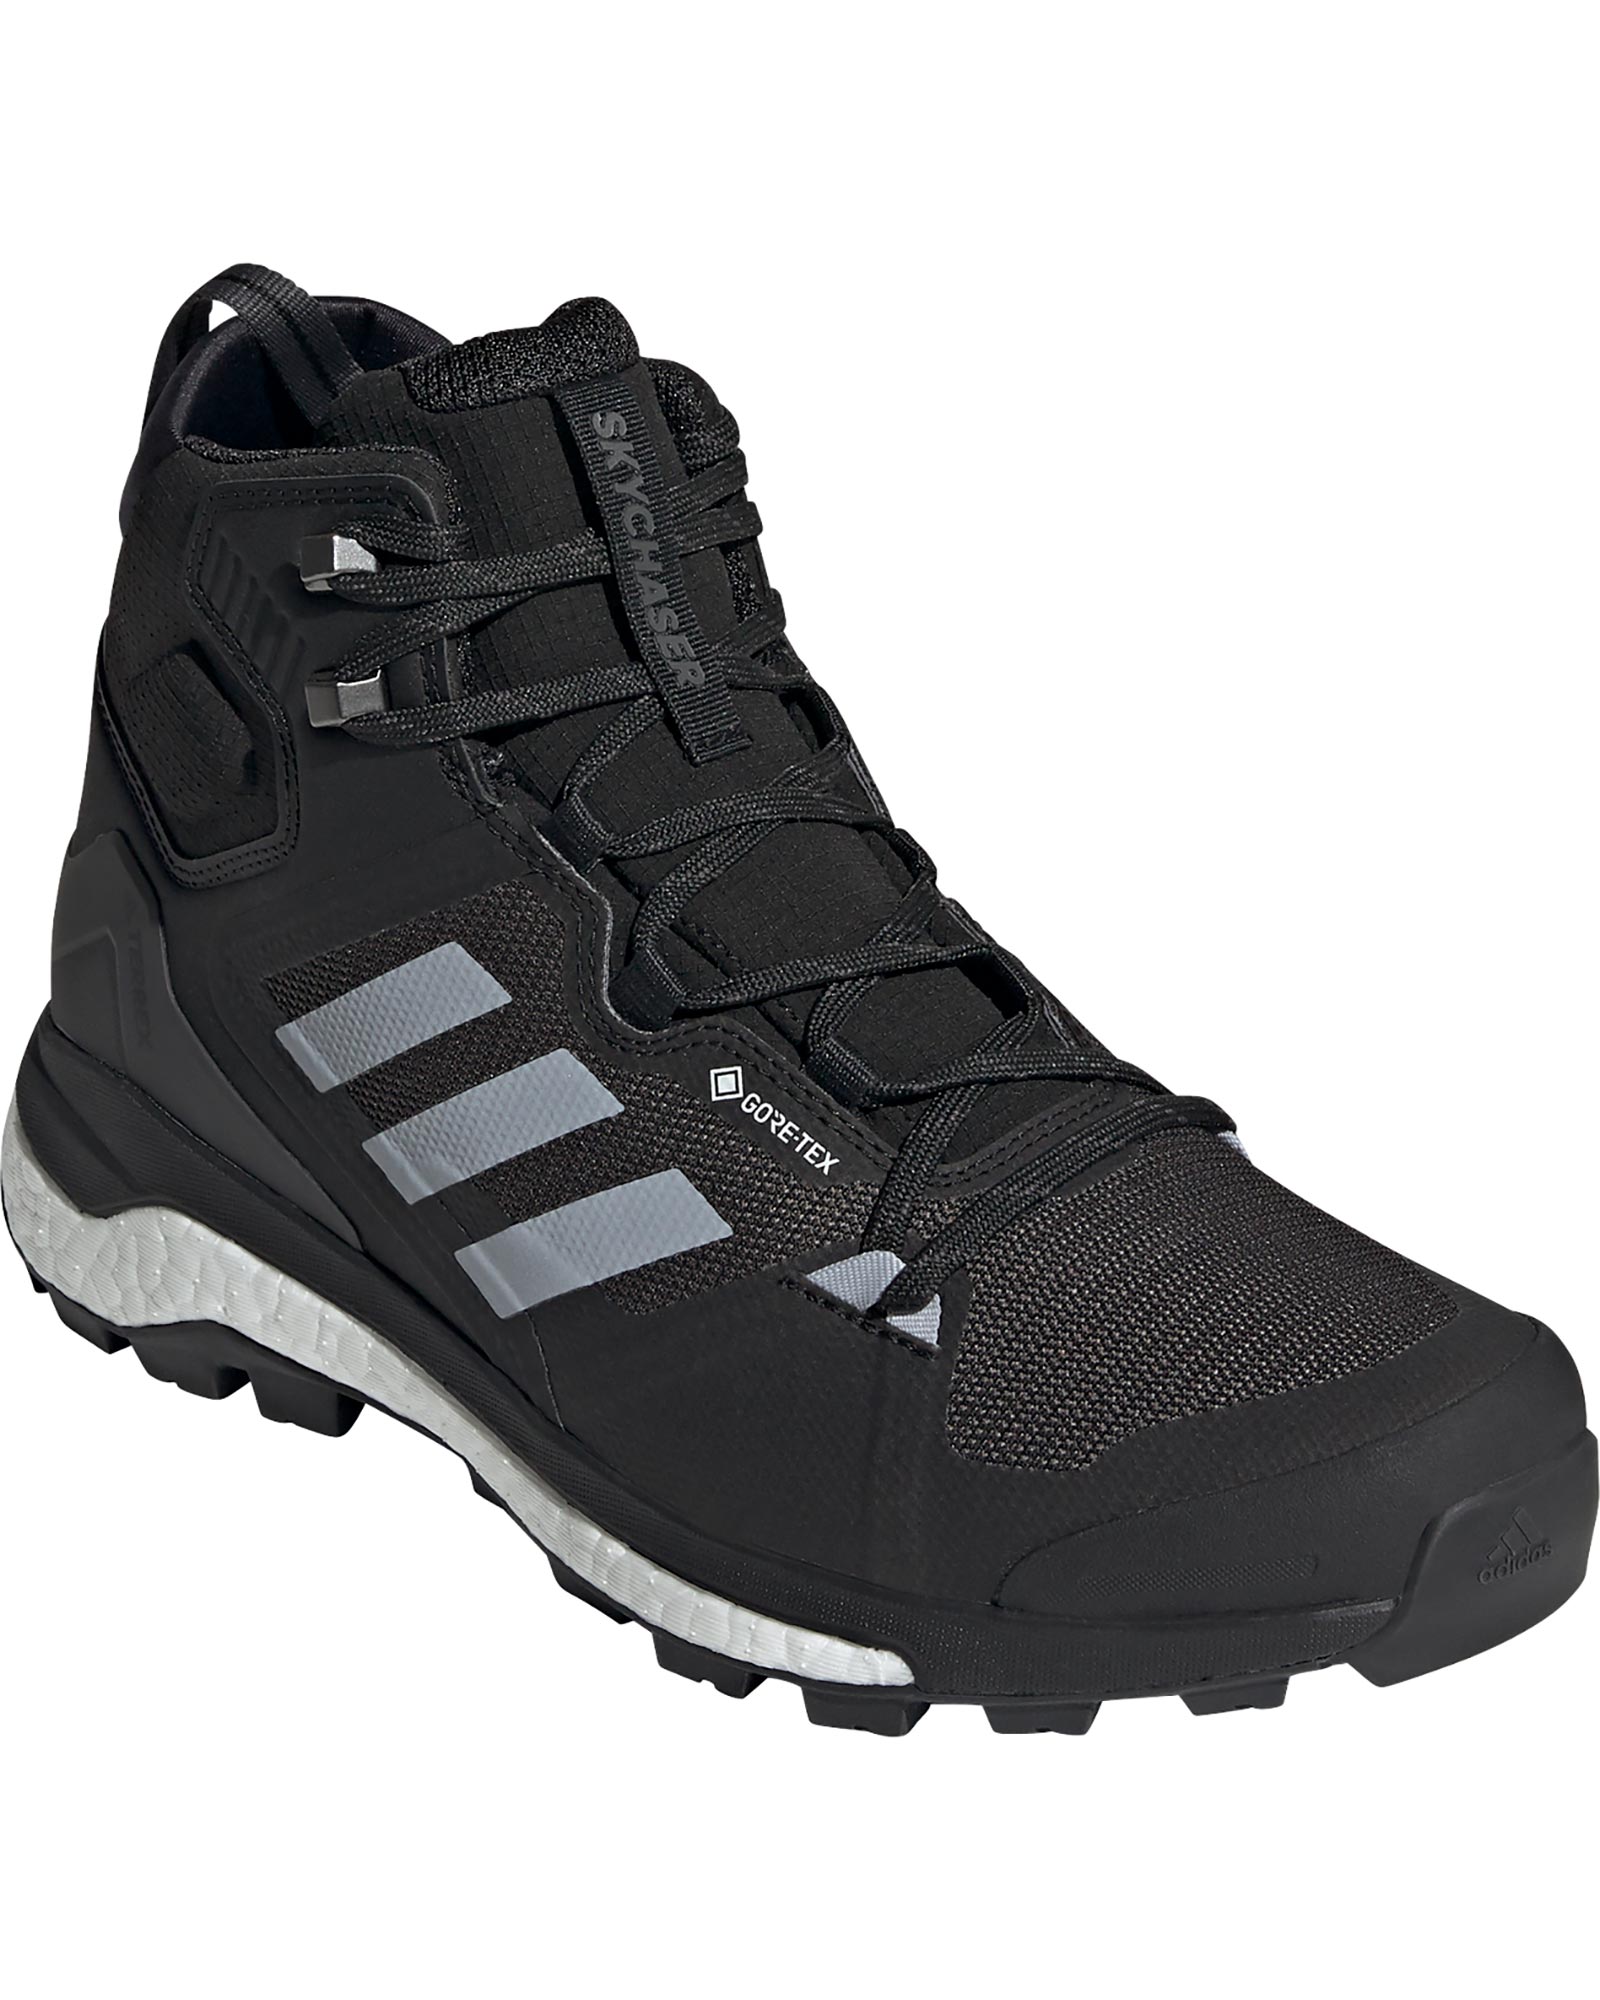 adidas TERREX Skychaser 2 Mid GORE TEX Men’s Boots - Core Black/Halo Silver/Dgh Solid Grey UK 7